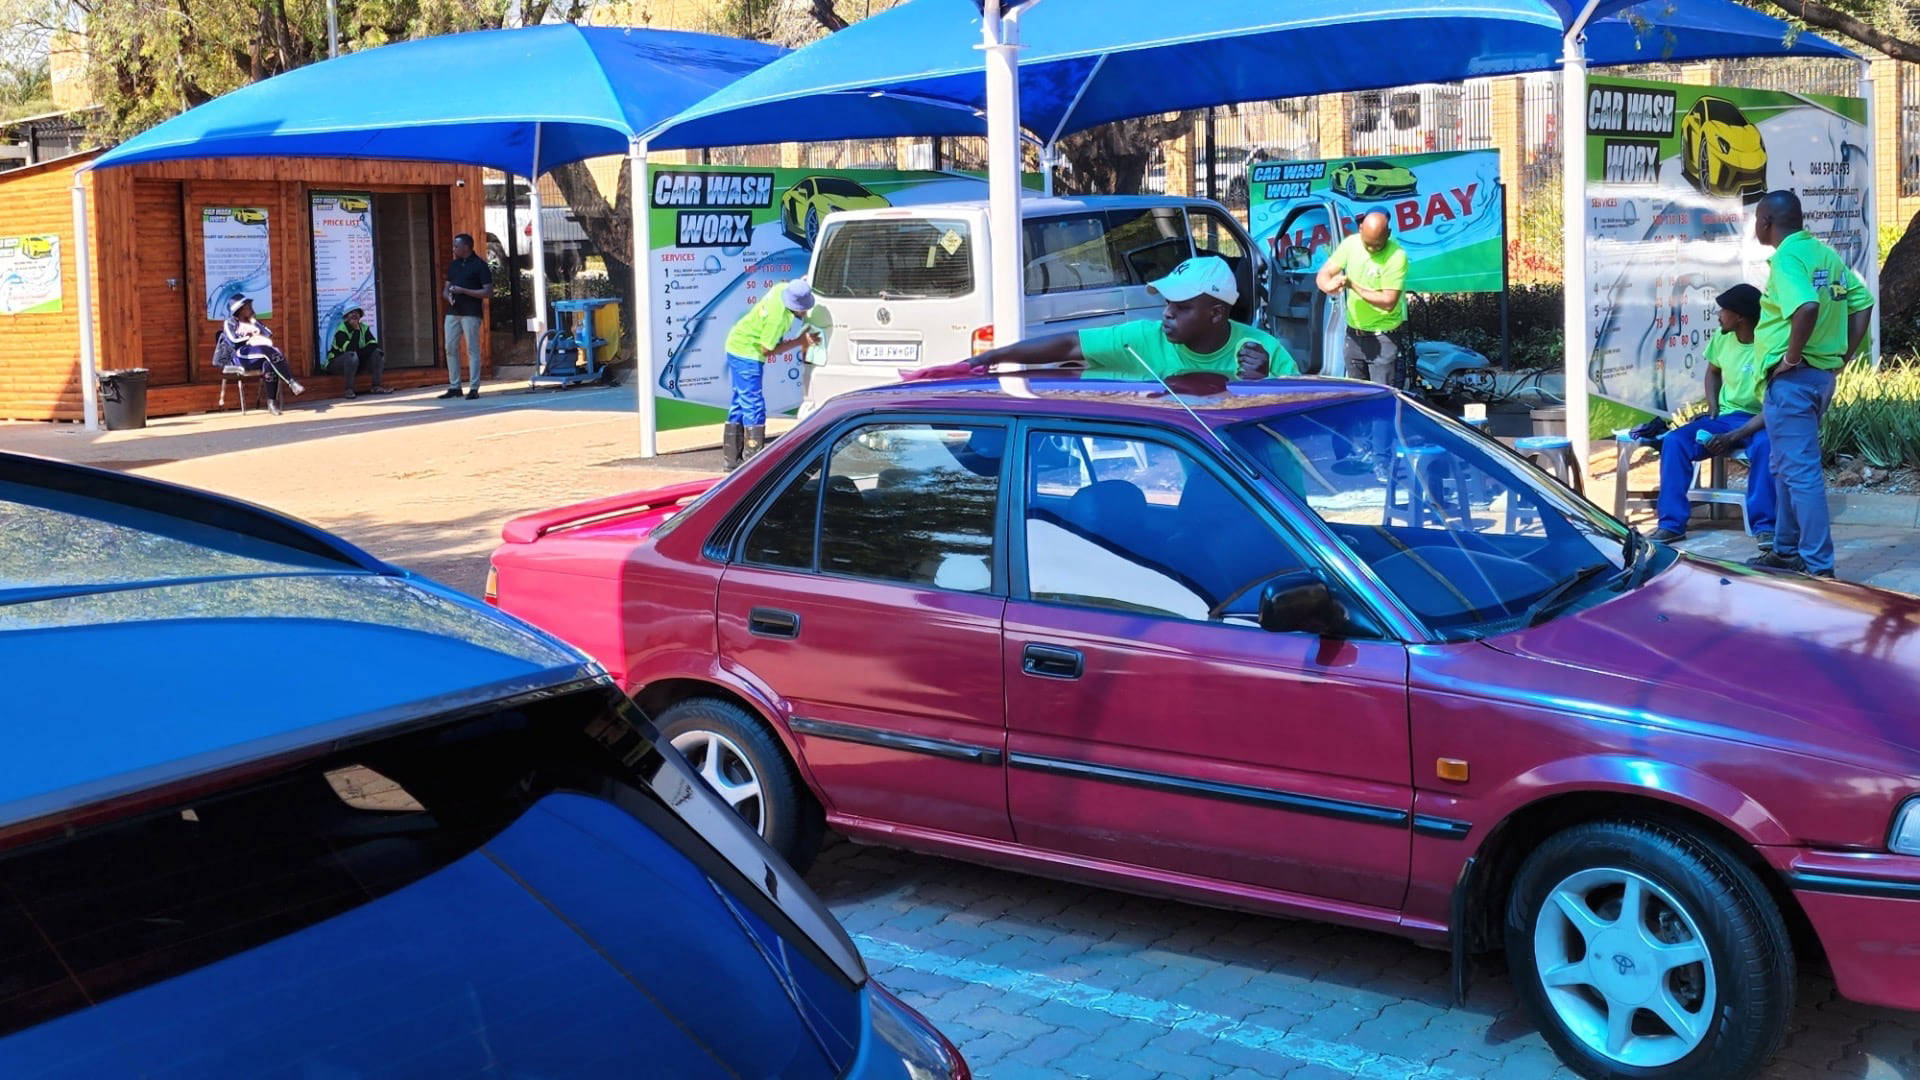 Castle Walk Shopping Centre CarWash Worx Pretoria Branch, Car Wash Franchises Available, CarWash Worx Head Office, Join The Leading Car Wash Franchising Group, Start Your Own Successful Car Wash Business Now